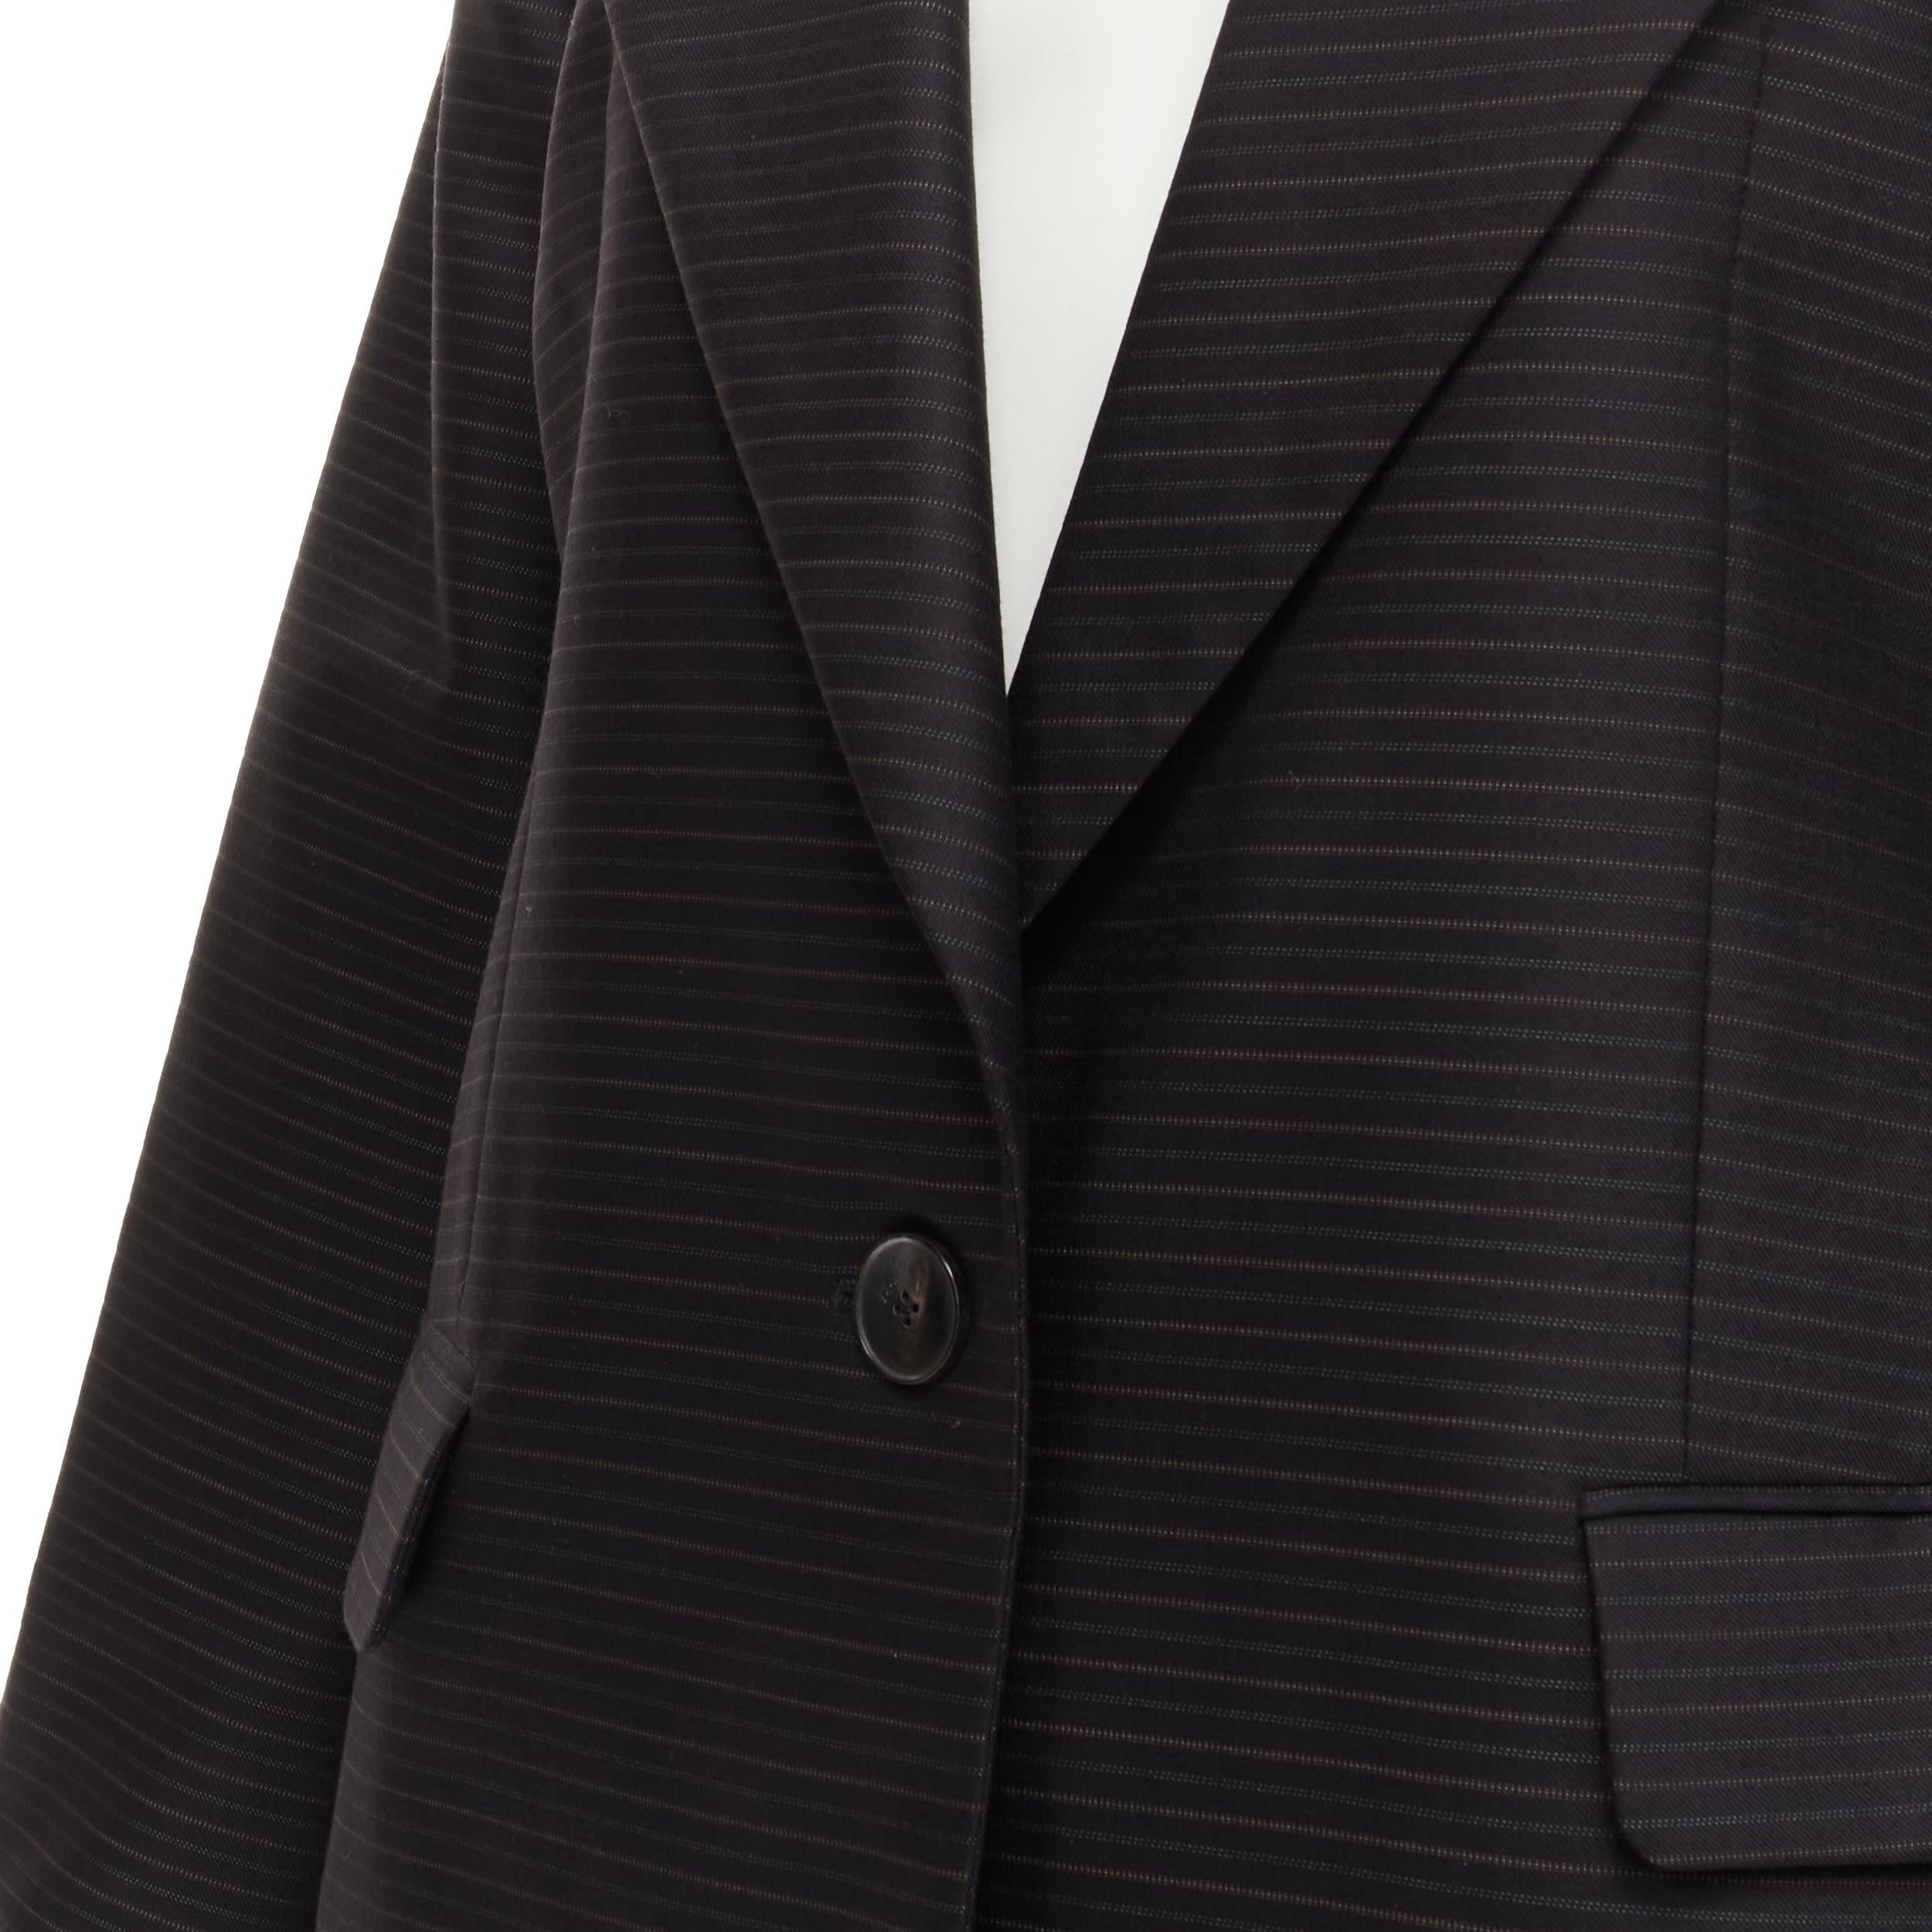 CHRISTIAN DIOR wool silk black brown horizontal pinstripe blazer jacket FR42 L 
Reference: GIYG/A00164 
Brand: Christian Dior 
Material: Wool 
Color: Black 
Pattern: Pinstripe 
Closure: Button 
Extra Detail: Wide notched spread collar. Single button